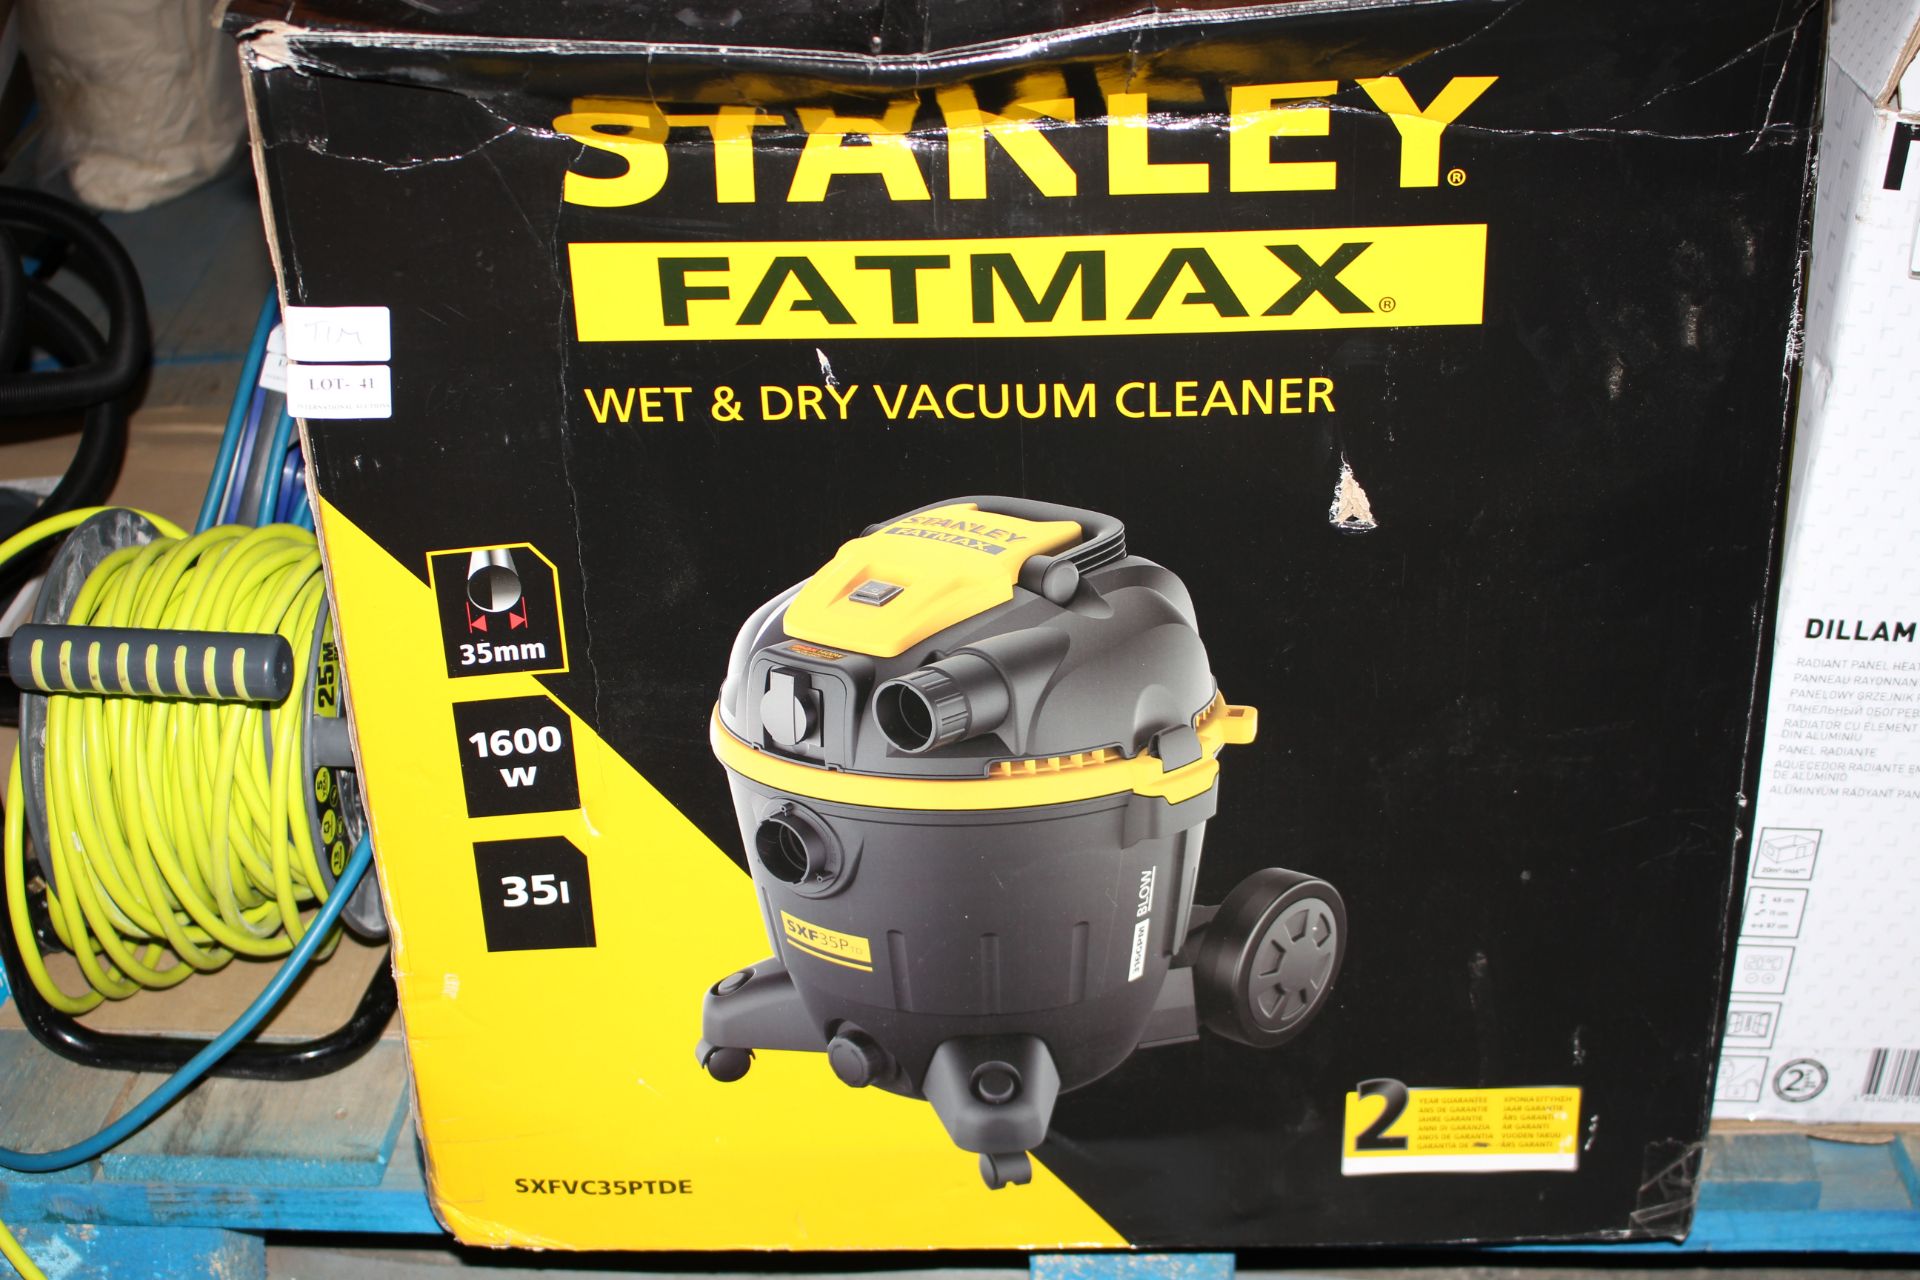 BOXED STANLEY FATMAX WET & DRY VACUUM CLEANER MODEL: SXFVC35PTDE RRP £109.99Condition